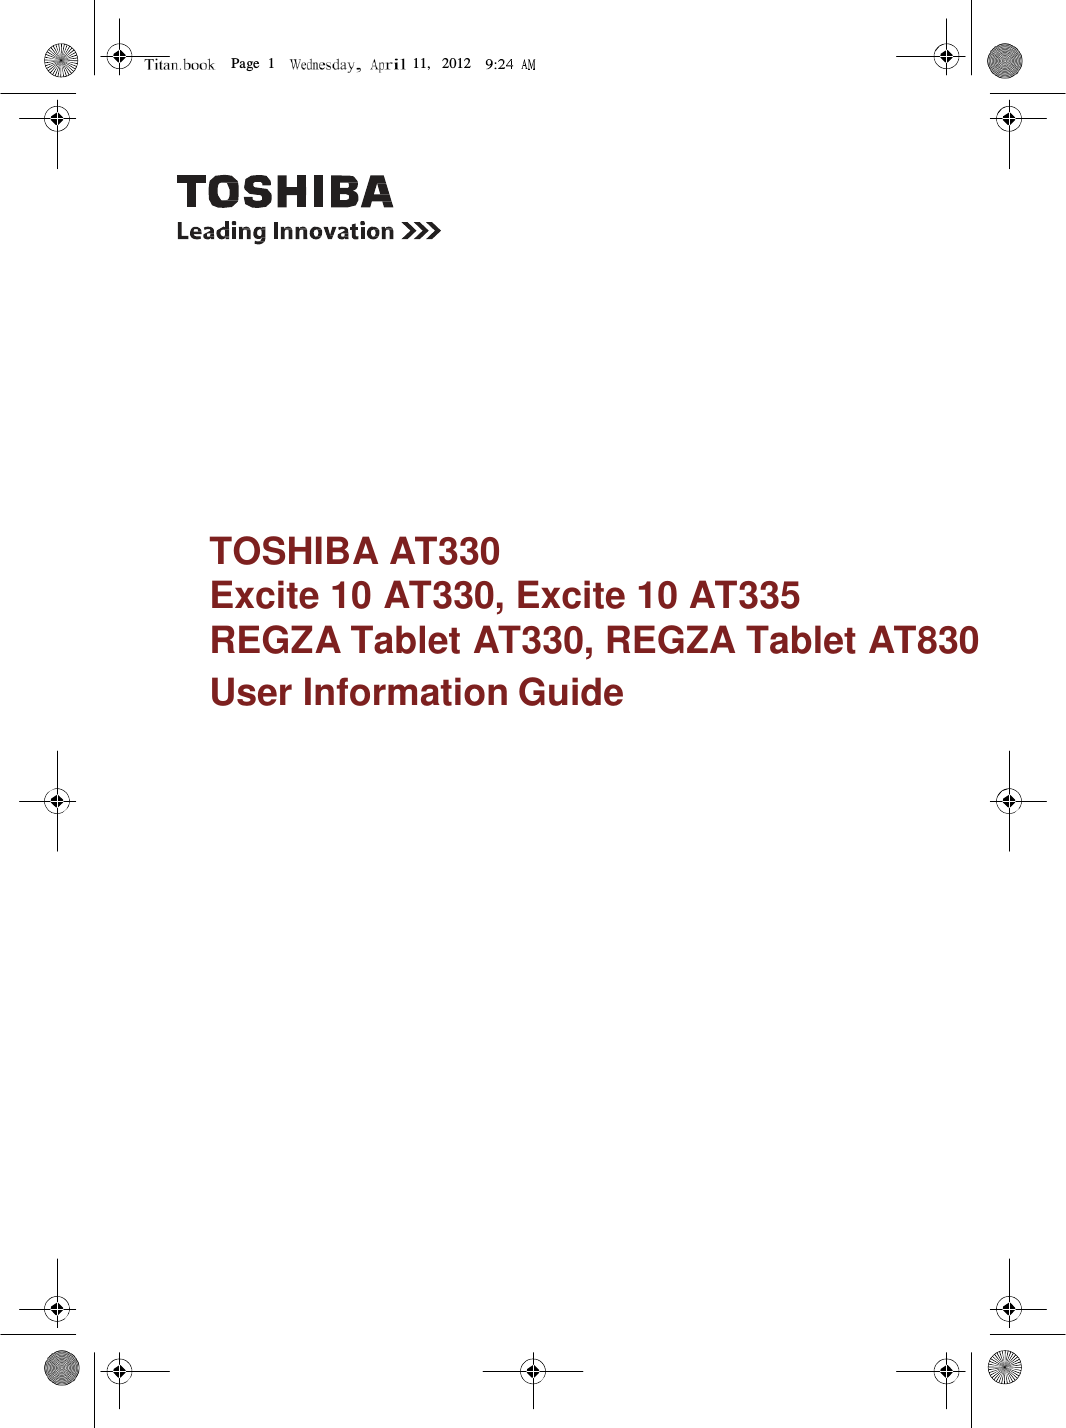 Page  1 11,   2012                      TOSHIBA AT330 Excite 10 AT330, Excite 10 AT335 REGZA Tablet AT330, REGZA Tablet AT830 User Information Guide 